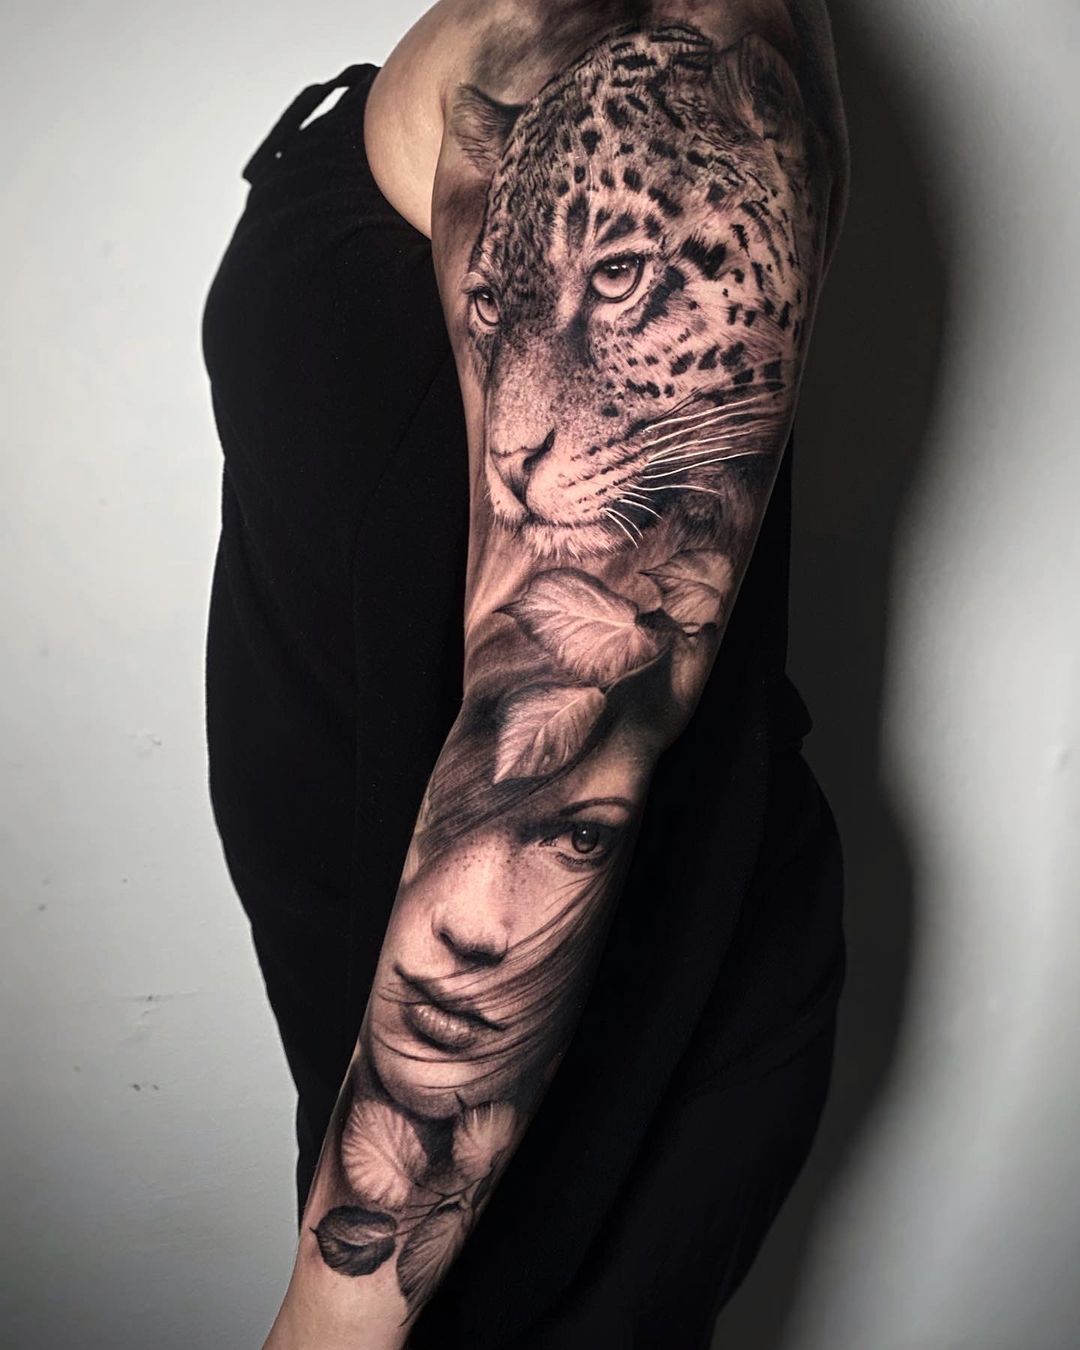 Tattoo Sleeves What You Should Know Iron Ink Tattoo